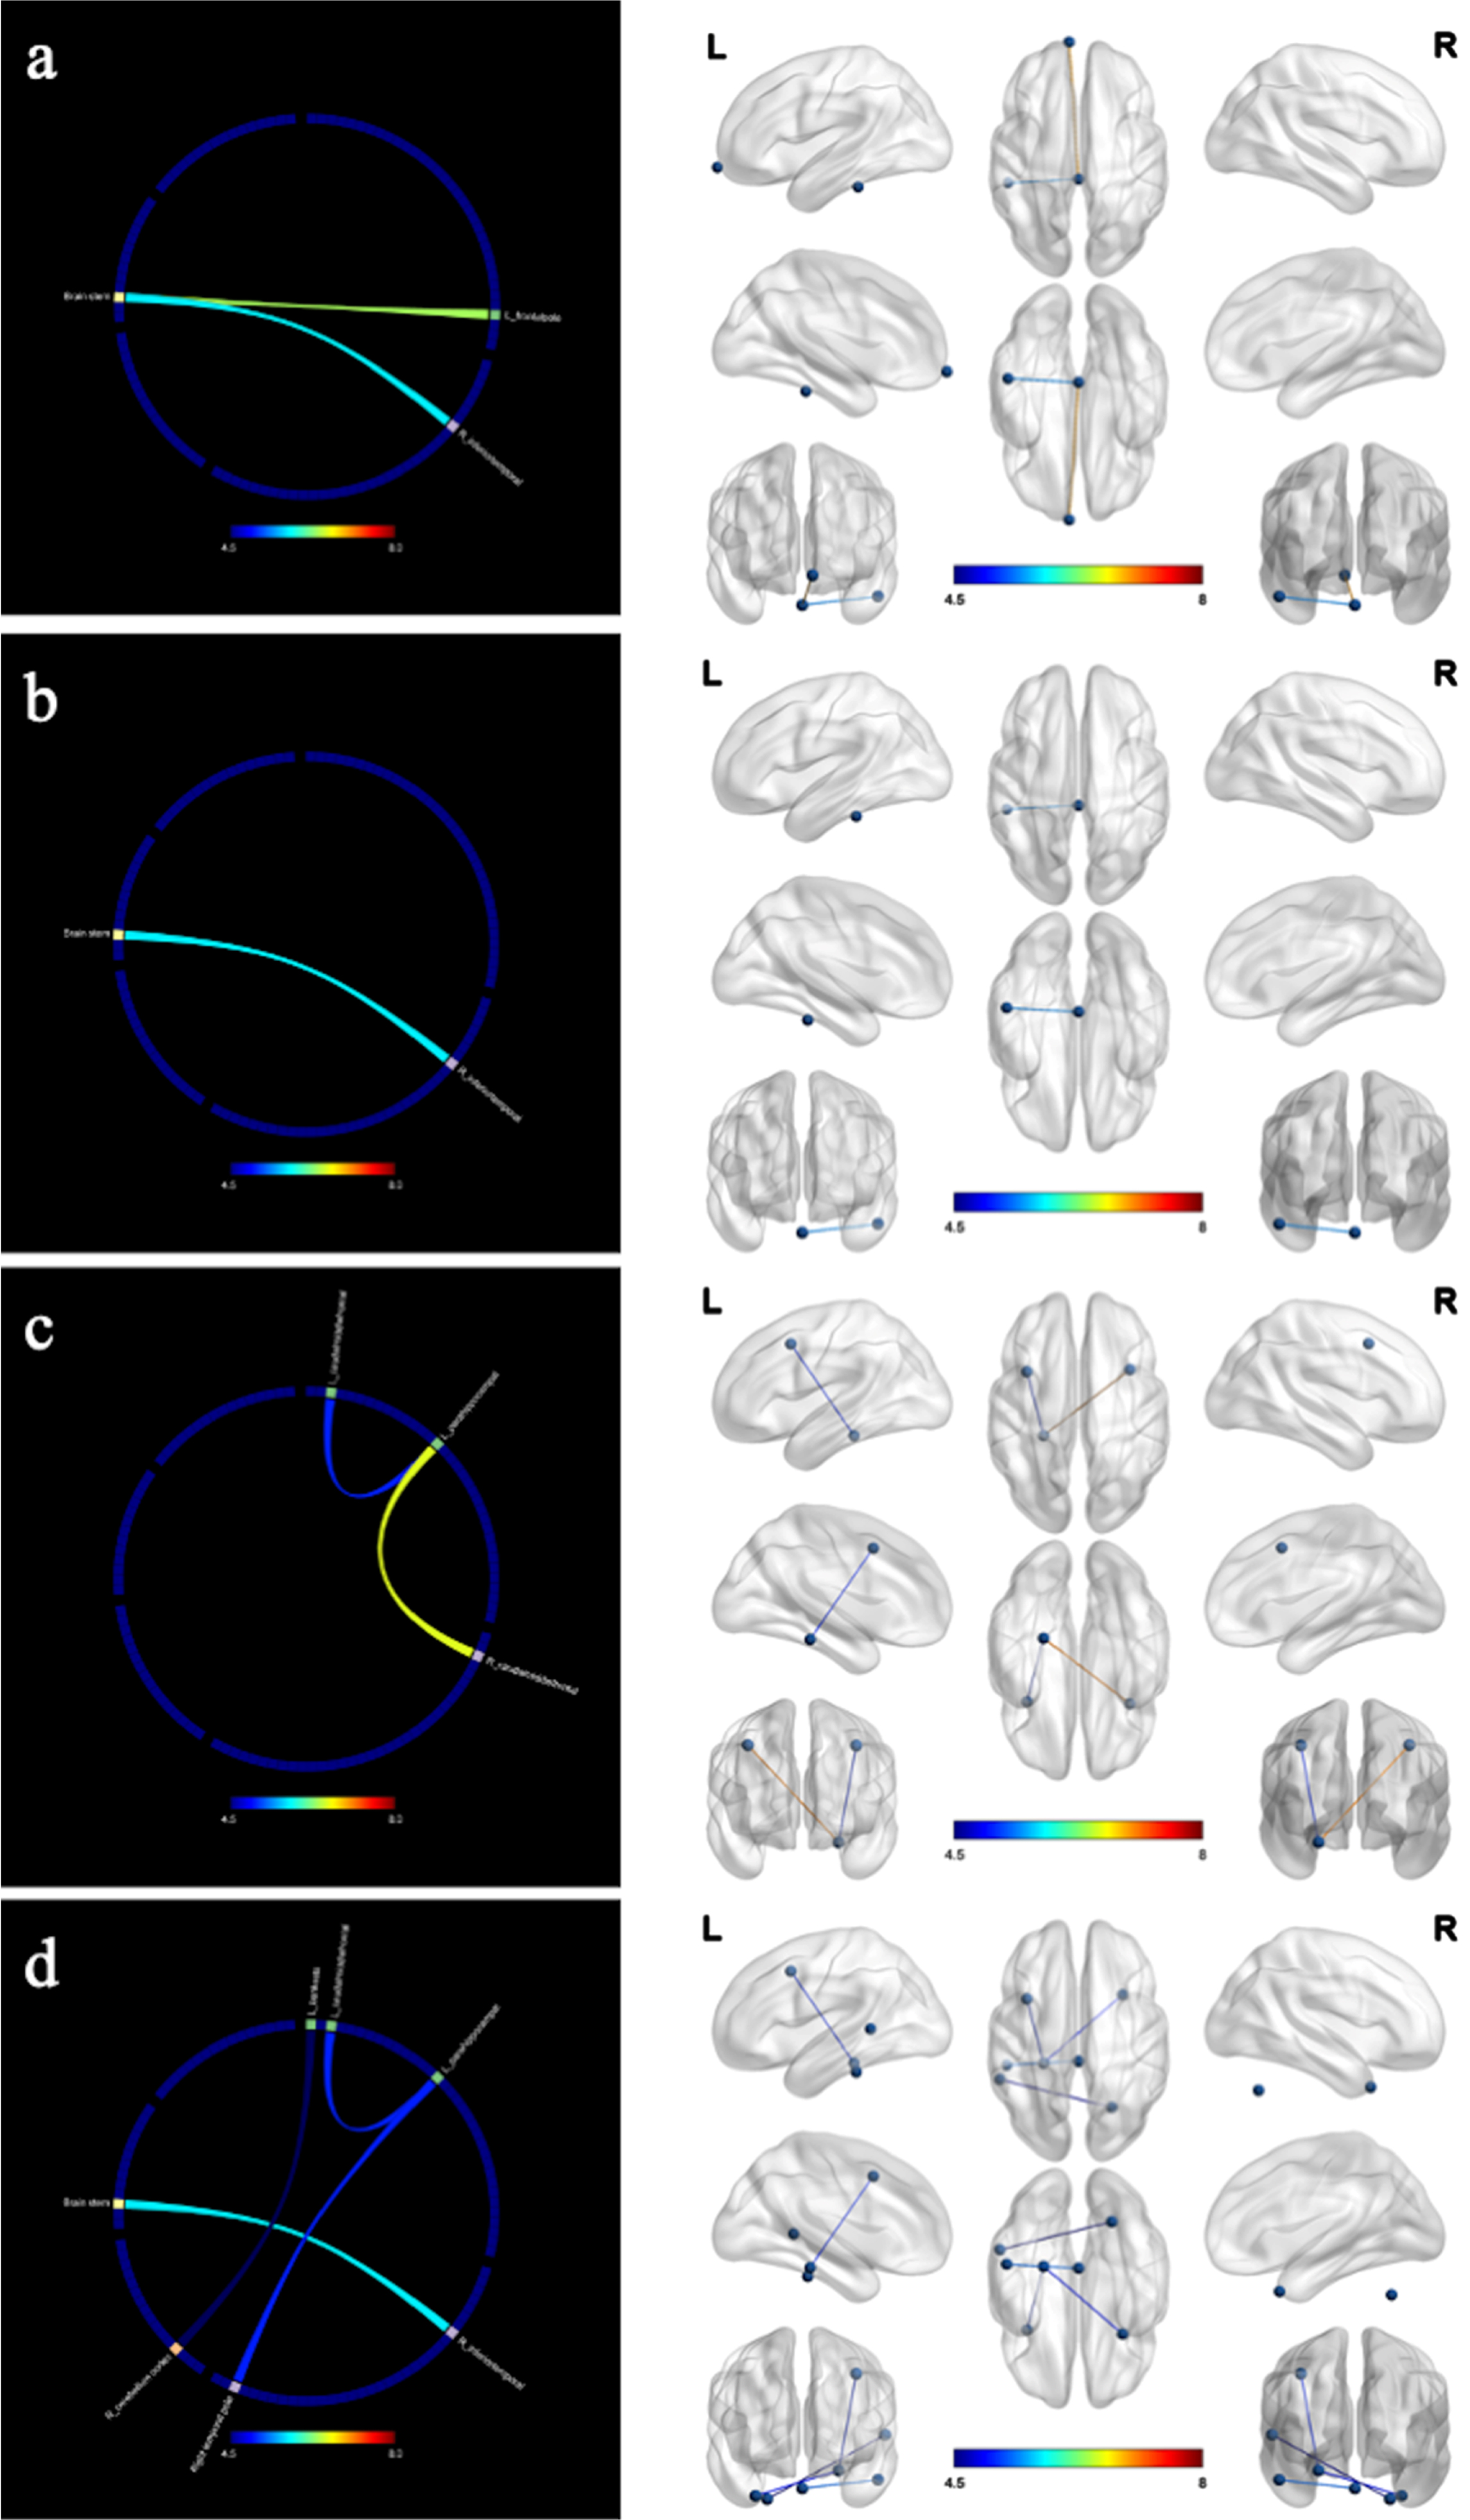 Changes in functional connectivity (resting state) after the intervention. a) concentration; b) executive; c) memory; d) recall; L, left; R, right. The intervention group showed improved in functional connectivity compared to the control group. The marked color of connecting line in the figure indicates the F value.